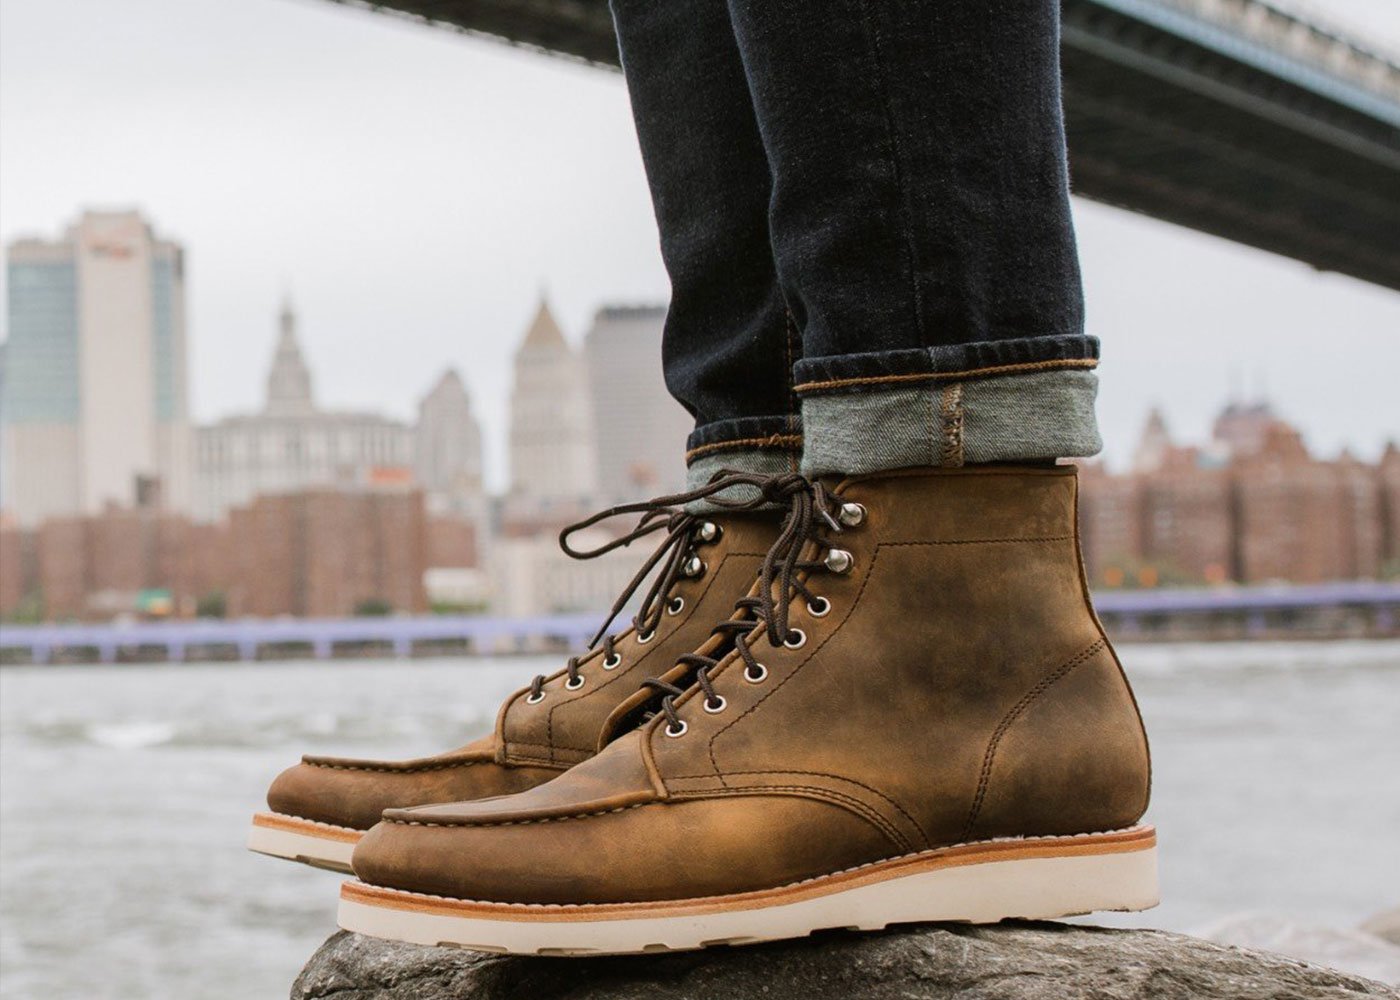 Men's Rugged Boots - Thursday Boot Company